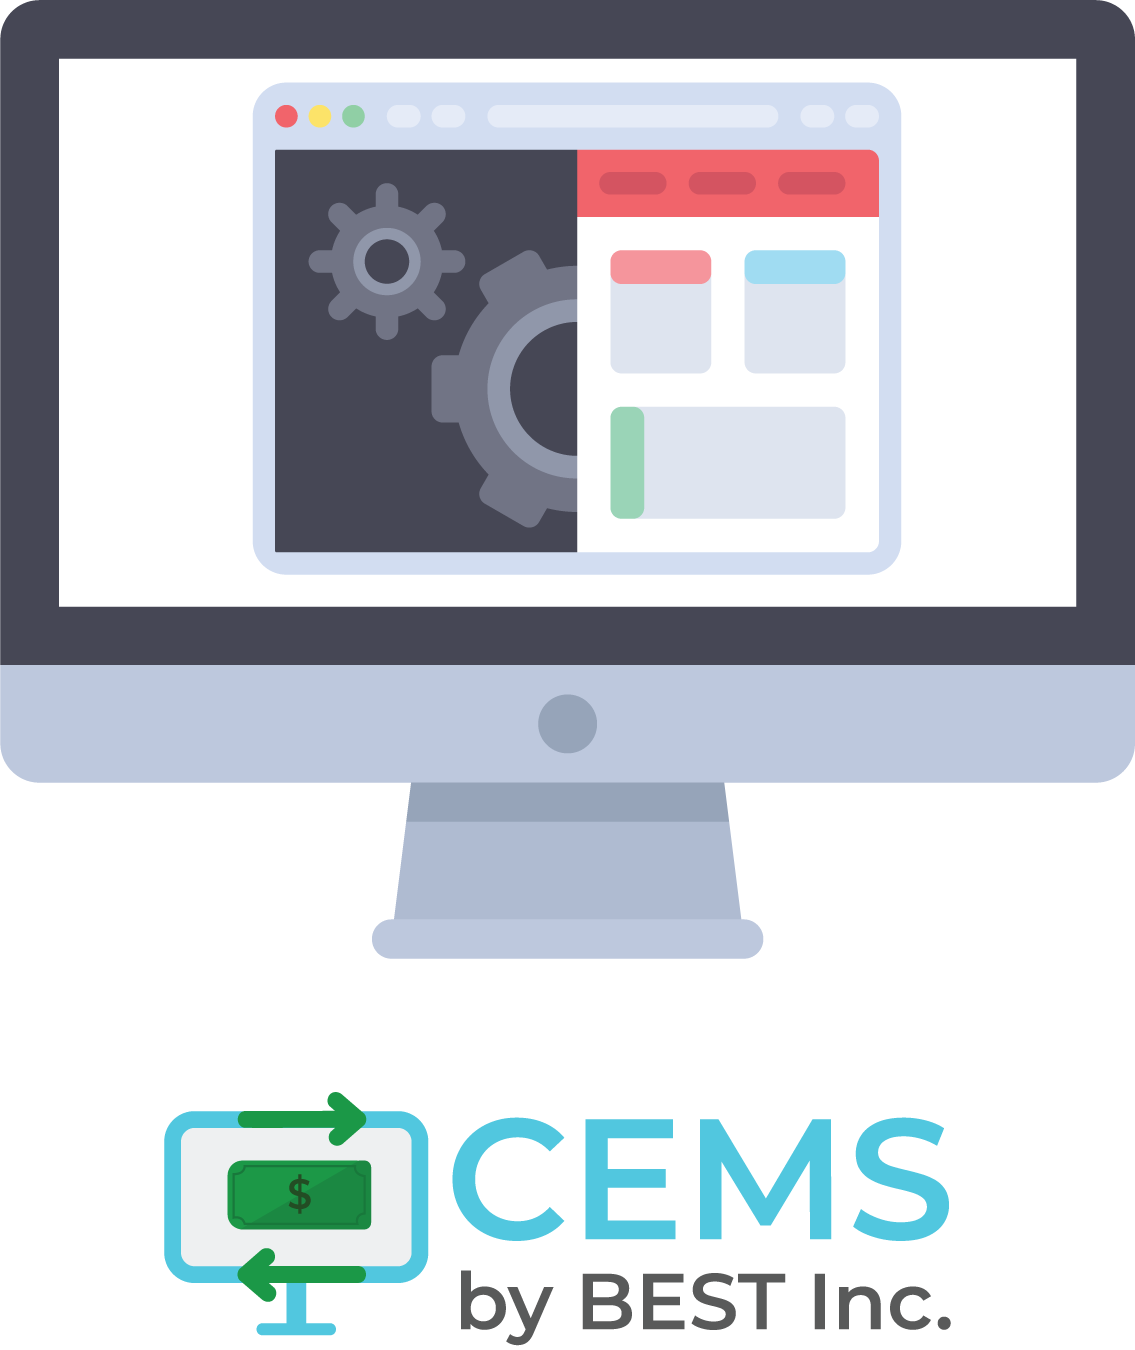 CEMS software